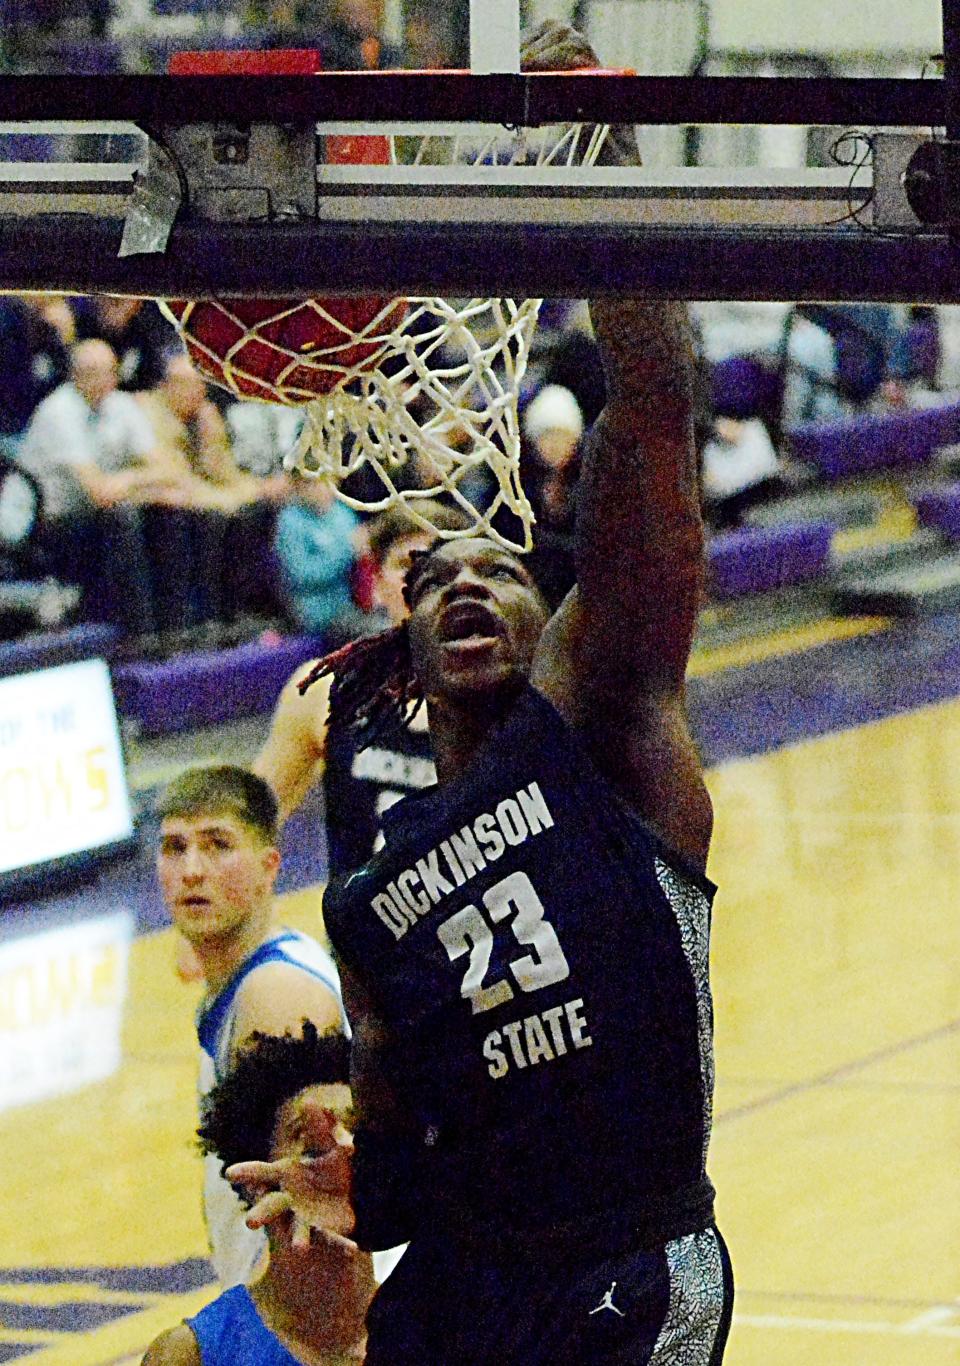 Dickinson State's Christian Murphy dunks the ball during the men's championship game of the North Star Athletic Association Basketball Final Four on Sunday, Feb. 26, 2023 in the Watertown Civic Arena.